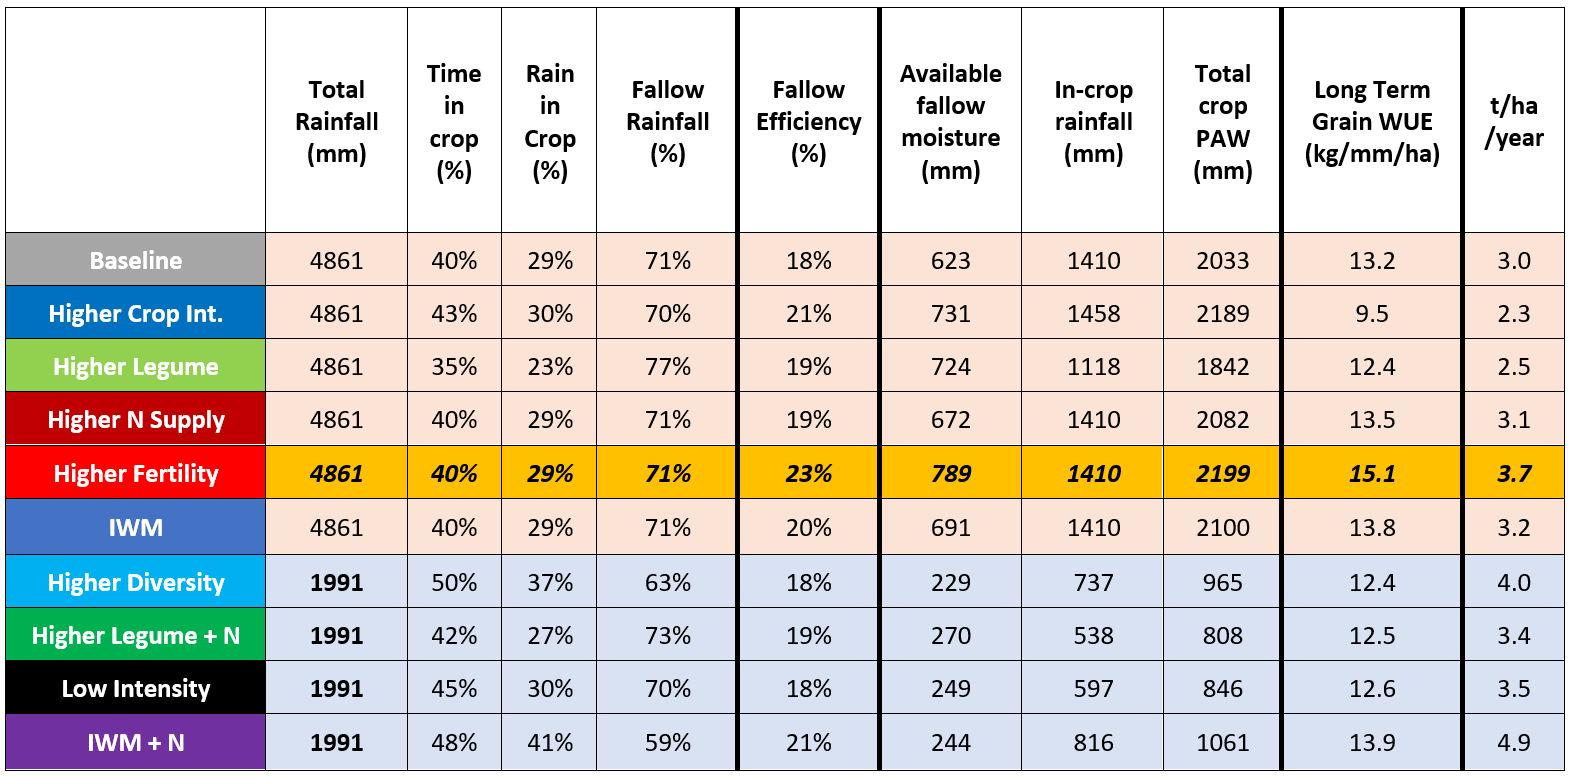 Table showing fallow efficiency (%) and water use efficiency (WUE) kg/mm/ha of all 10 systems since commencement of that system.